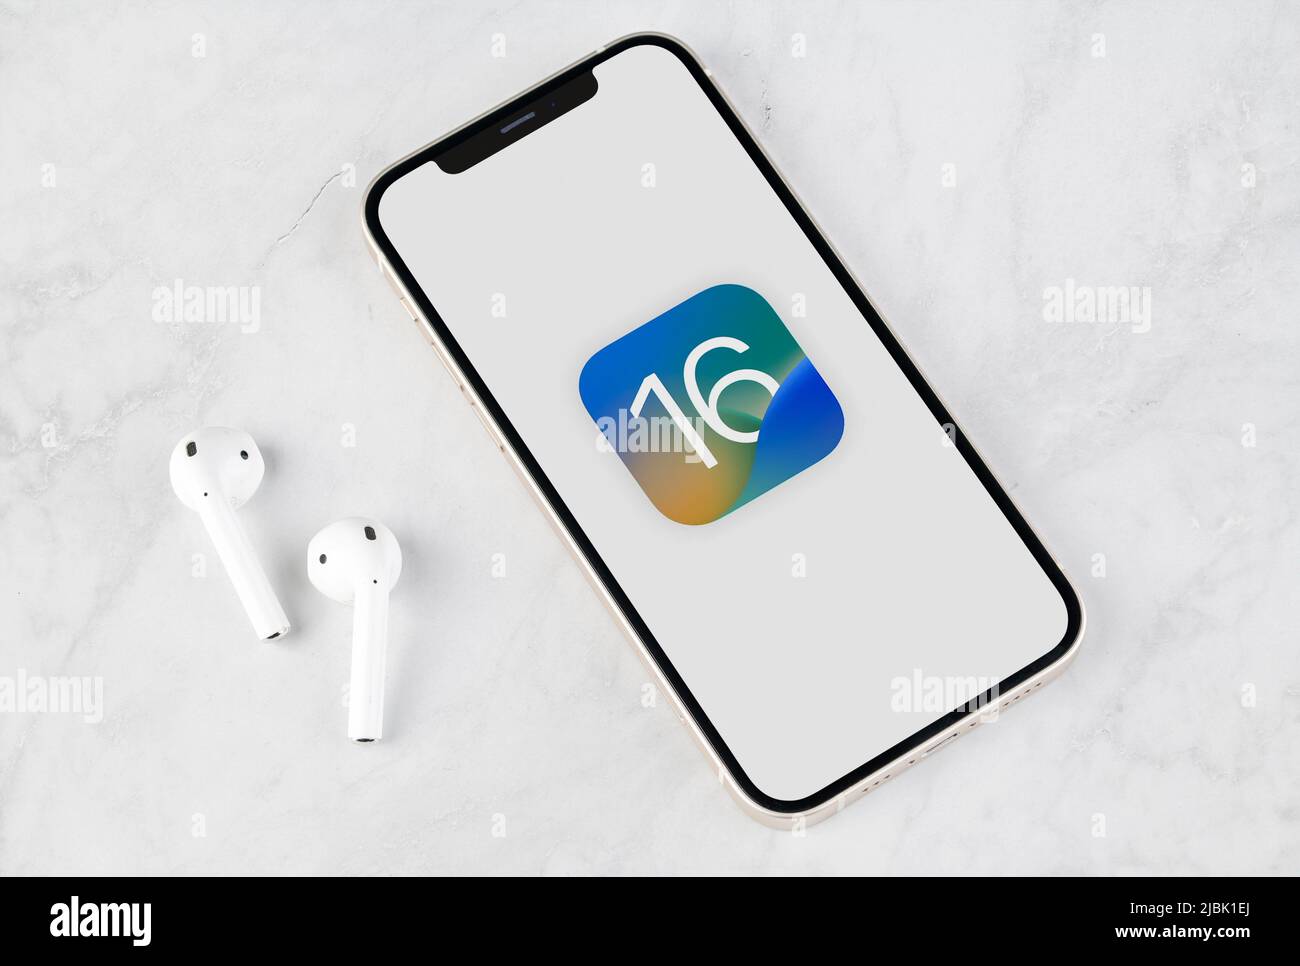 Antalya, TURKEY - June 7, 2022. iPhone 13 Pro screen with new iOS 16 logo, the next operating system for Apple's smartphones will be released Stock Photo